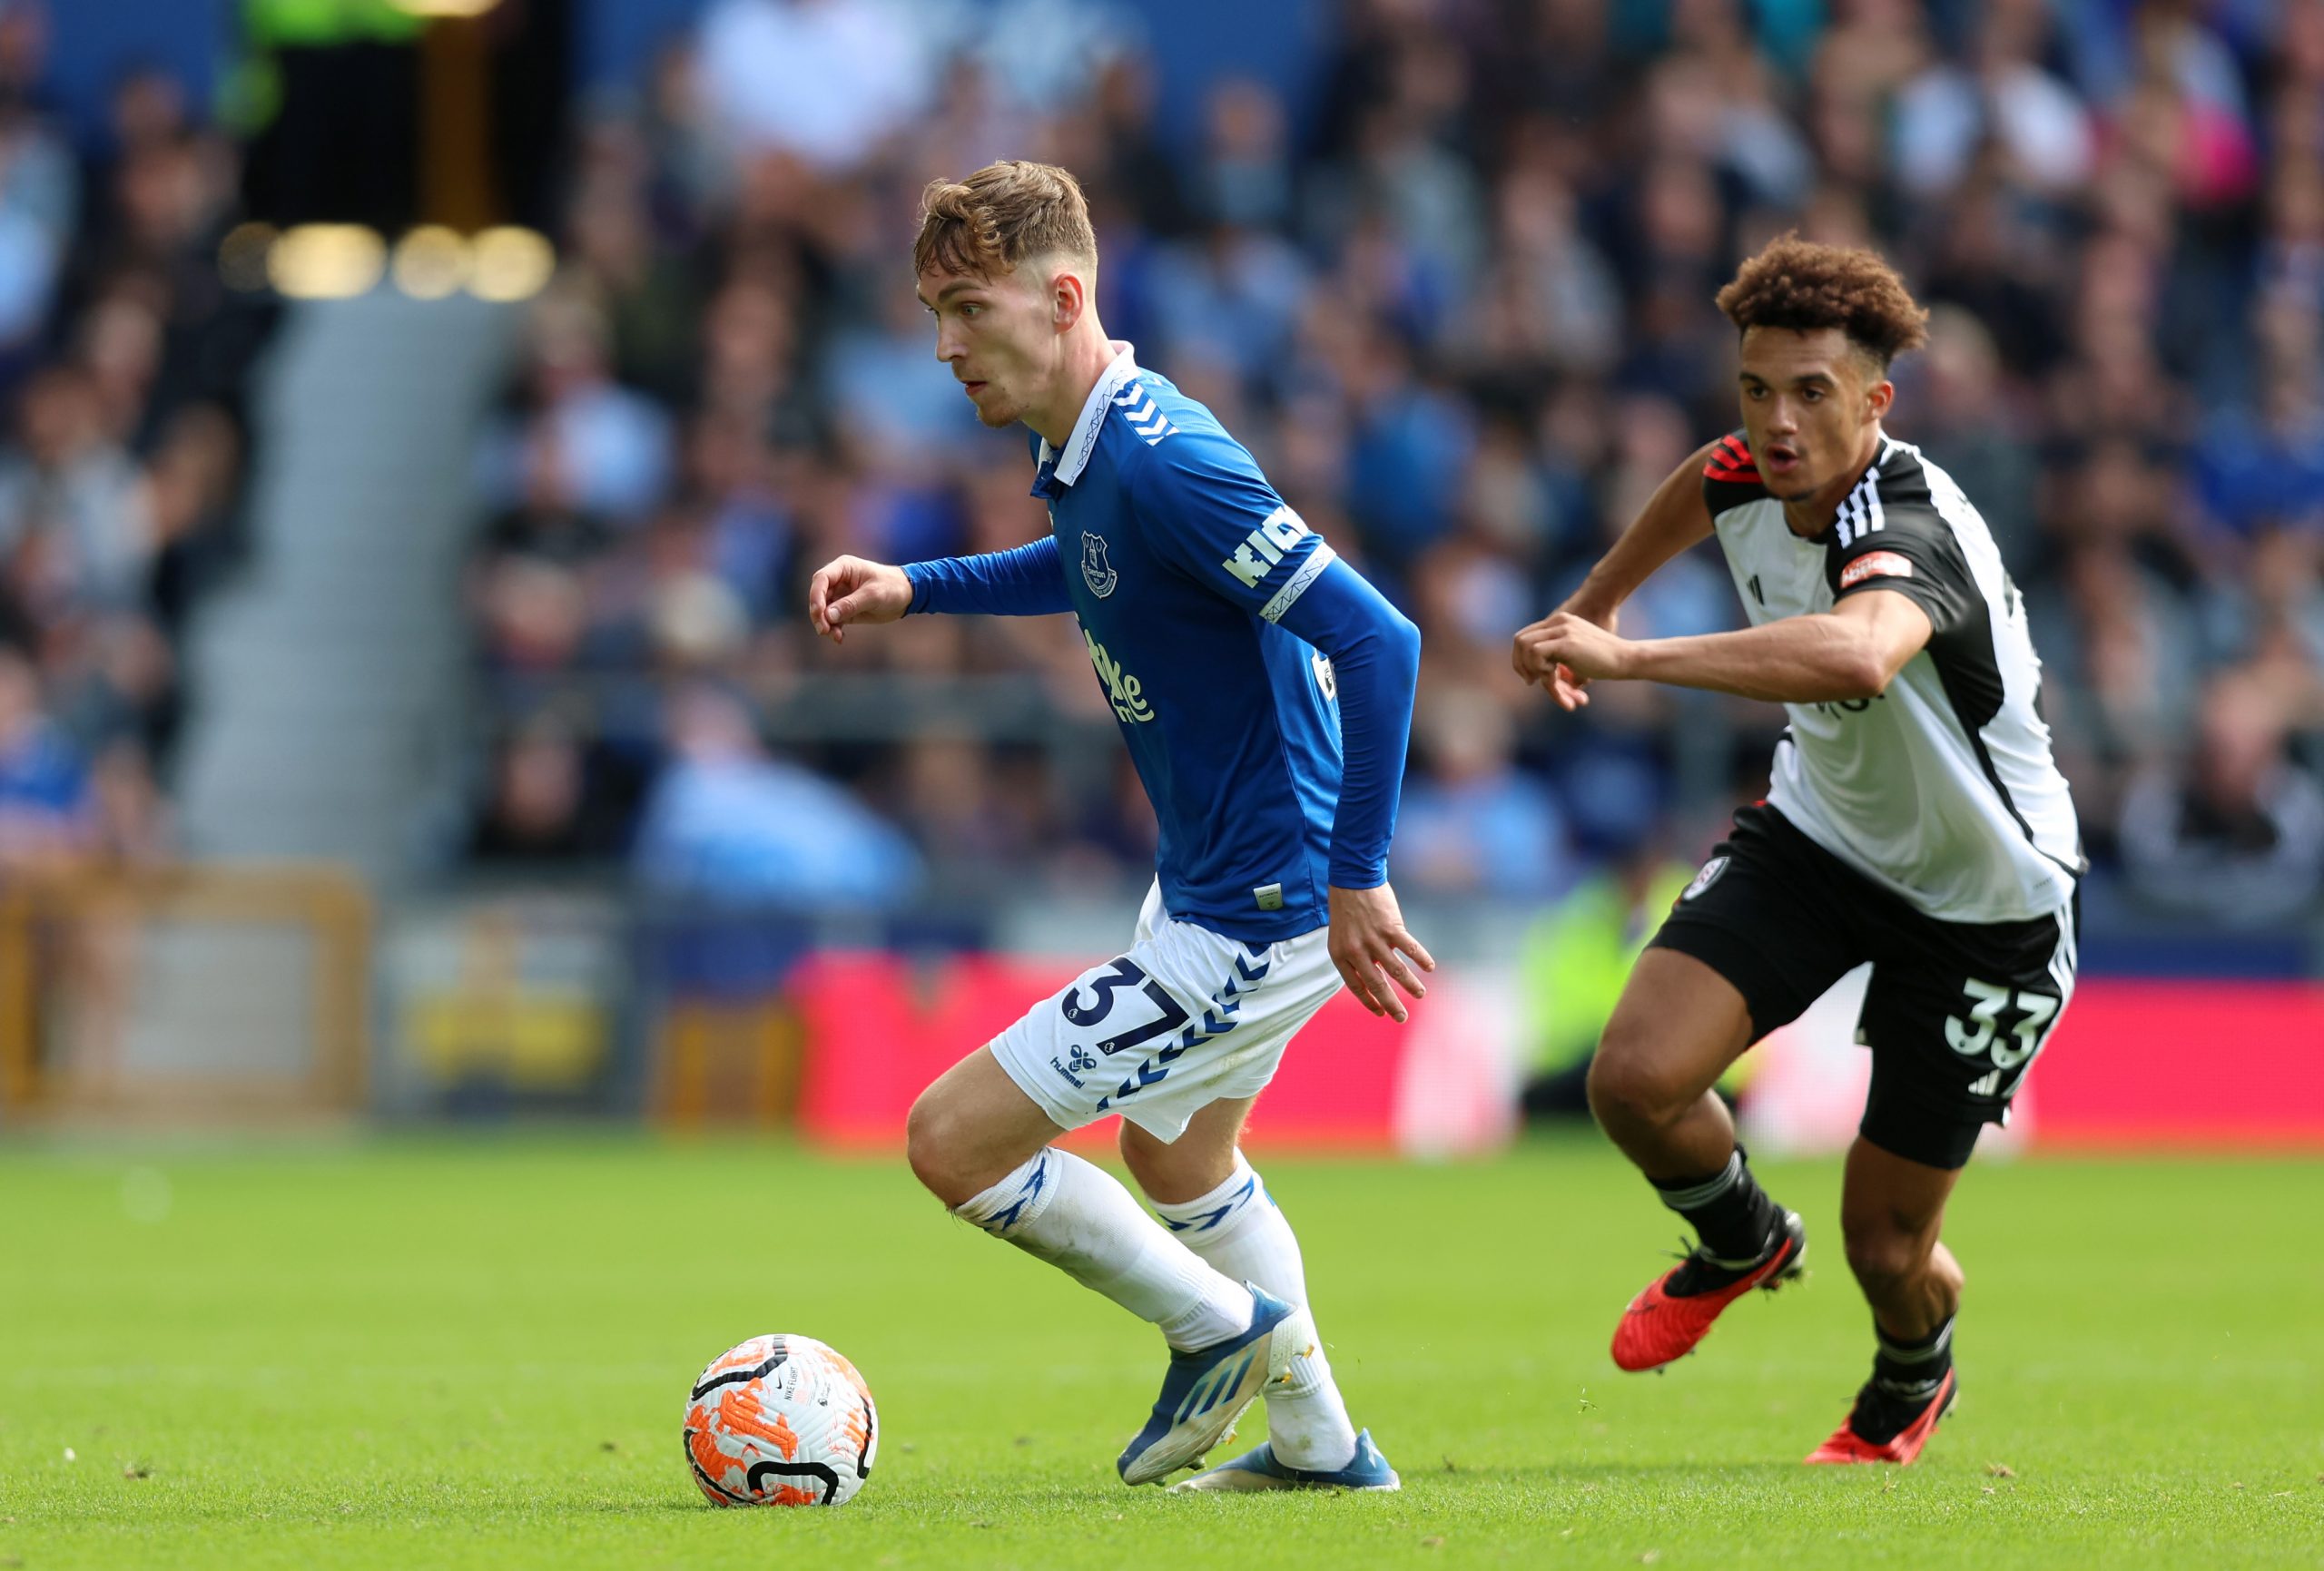 LIVERPOOL, ENGLAND - AUGUST 12: James Garner of Everton controls the ball against Antonee Robinson of Fulham during the Premier League match between Everton FC and Fulham FC at Goodison Park on August 12, 2023 in Liverpool, England. (Photo by Nathan Stirk/Getty Images)